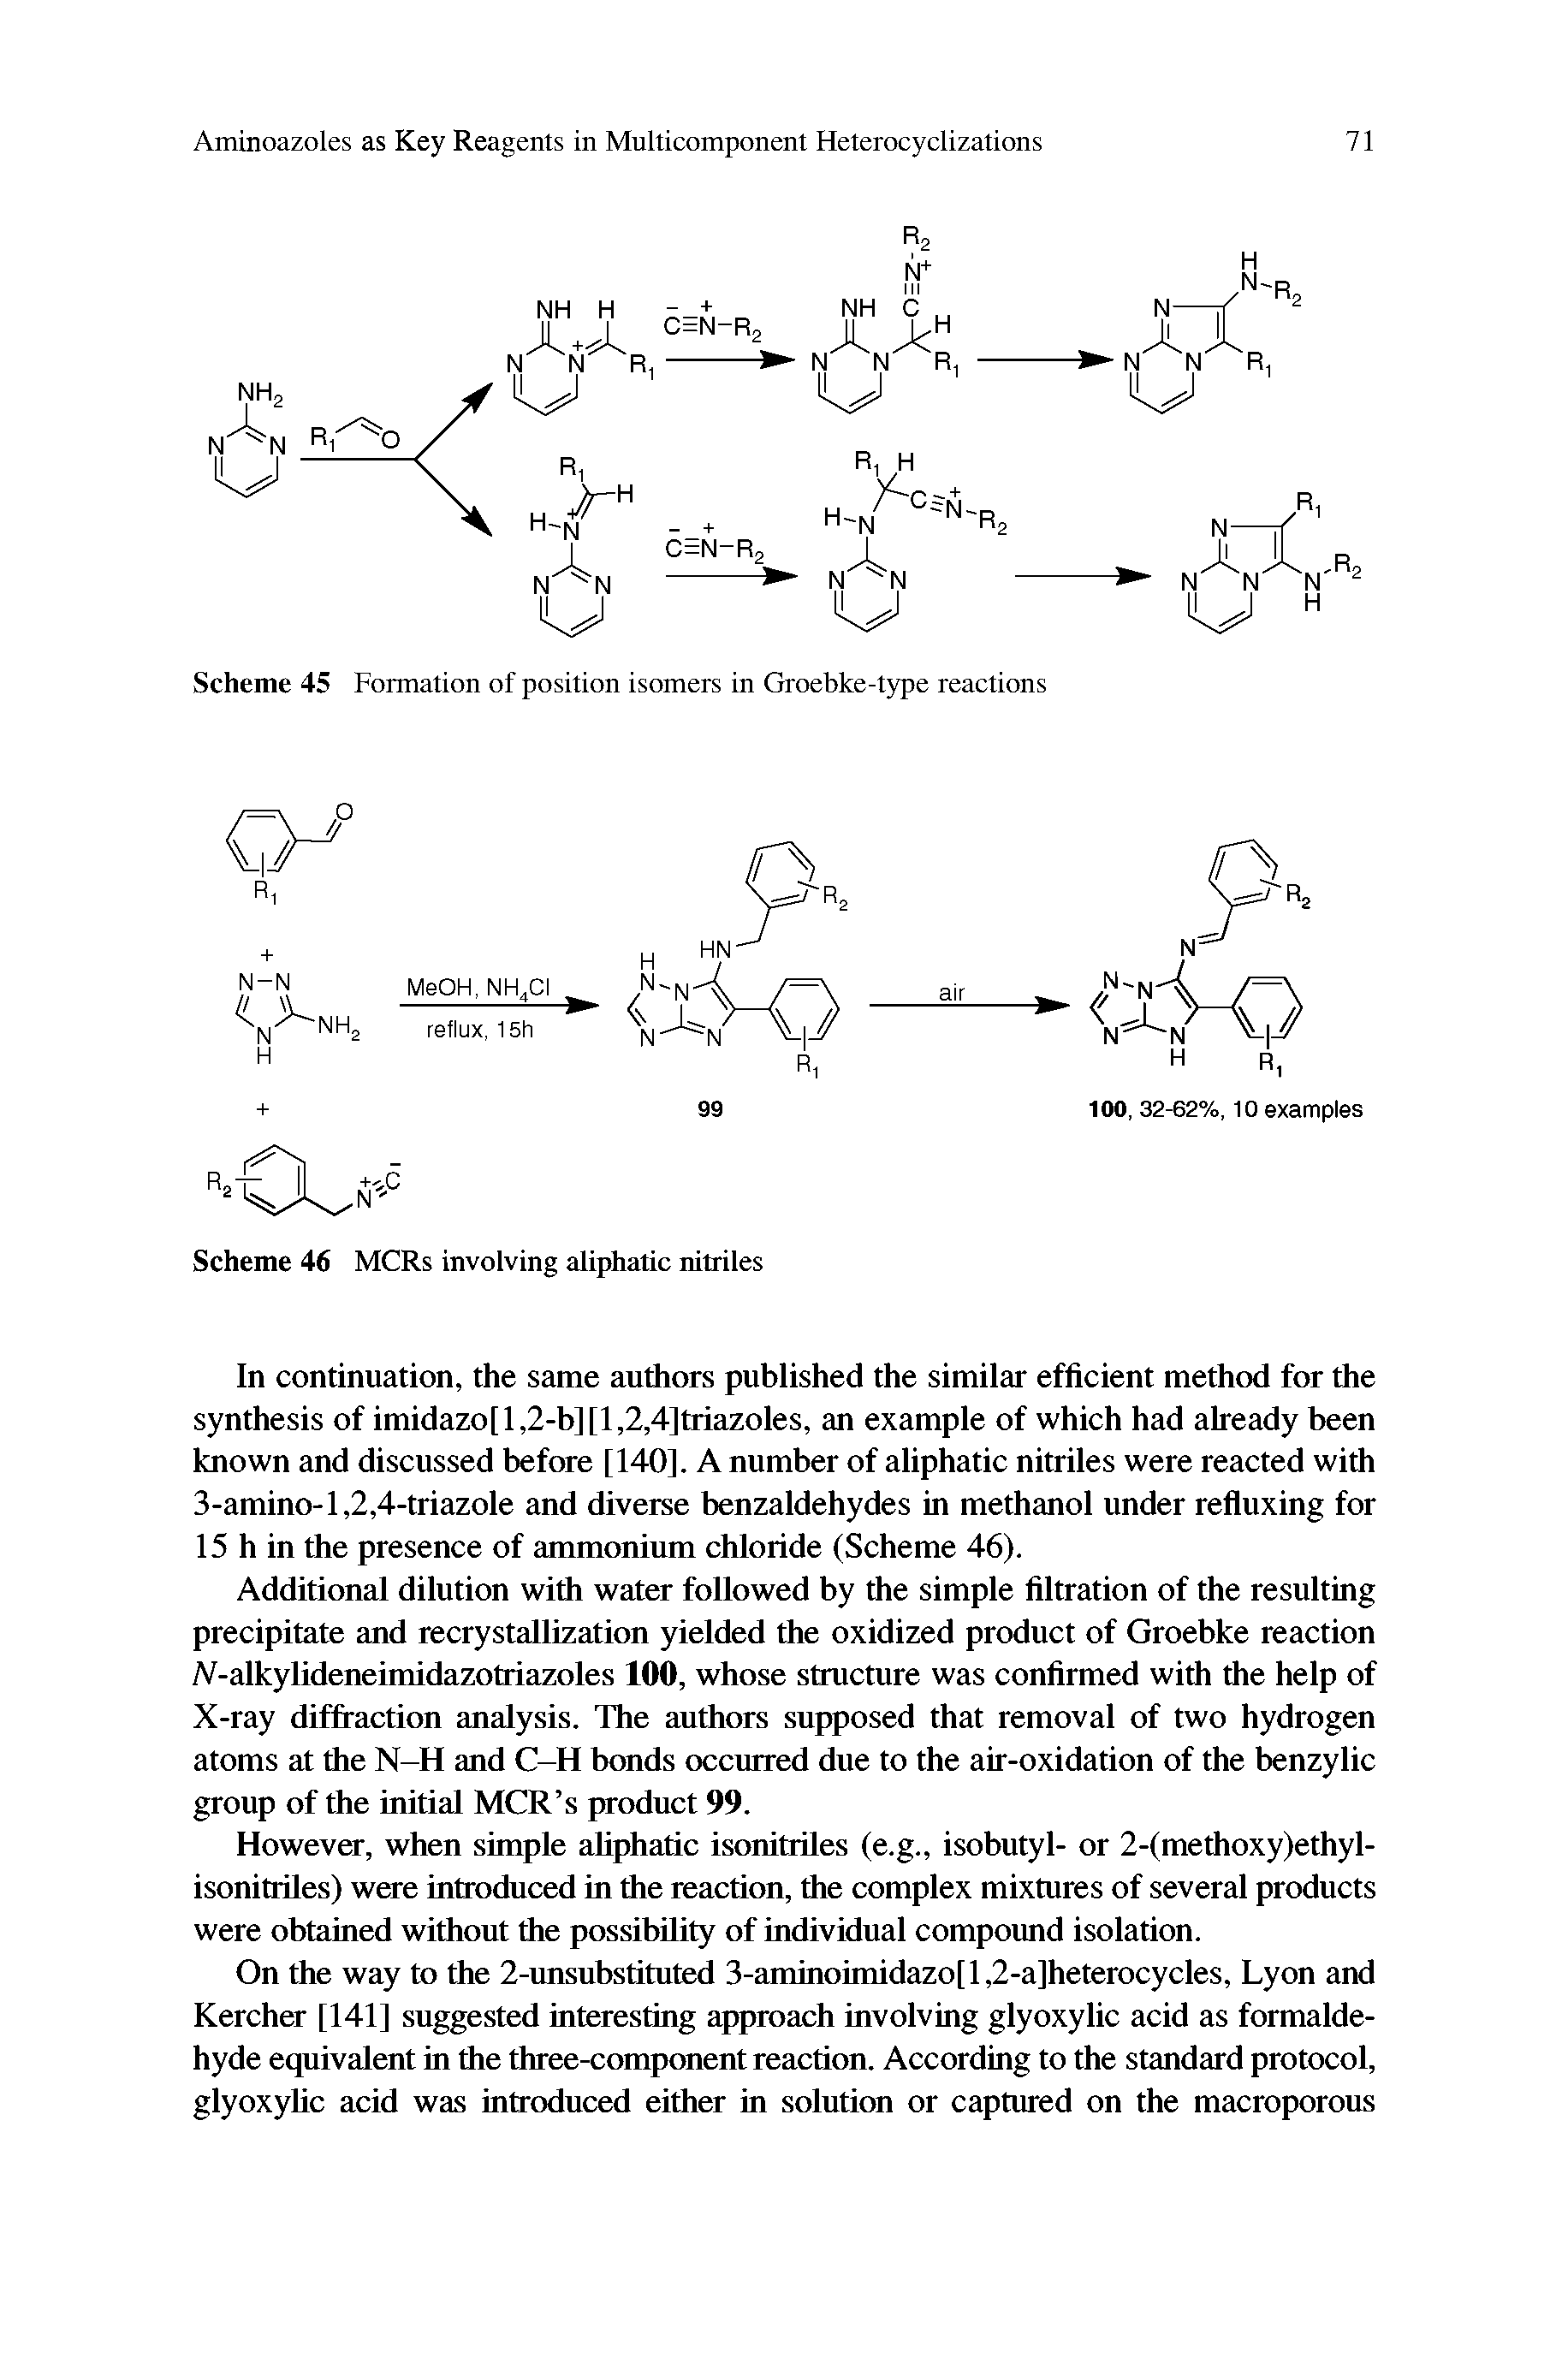 Scheme 45 Formation of position isomers in Groebke-type reactions...